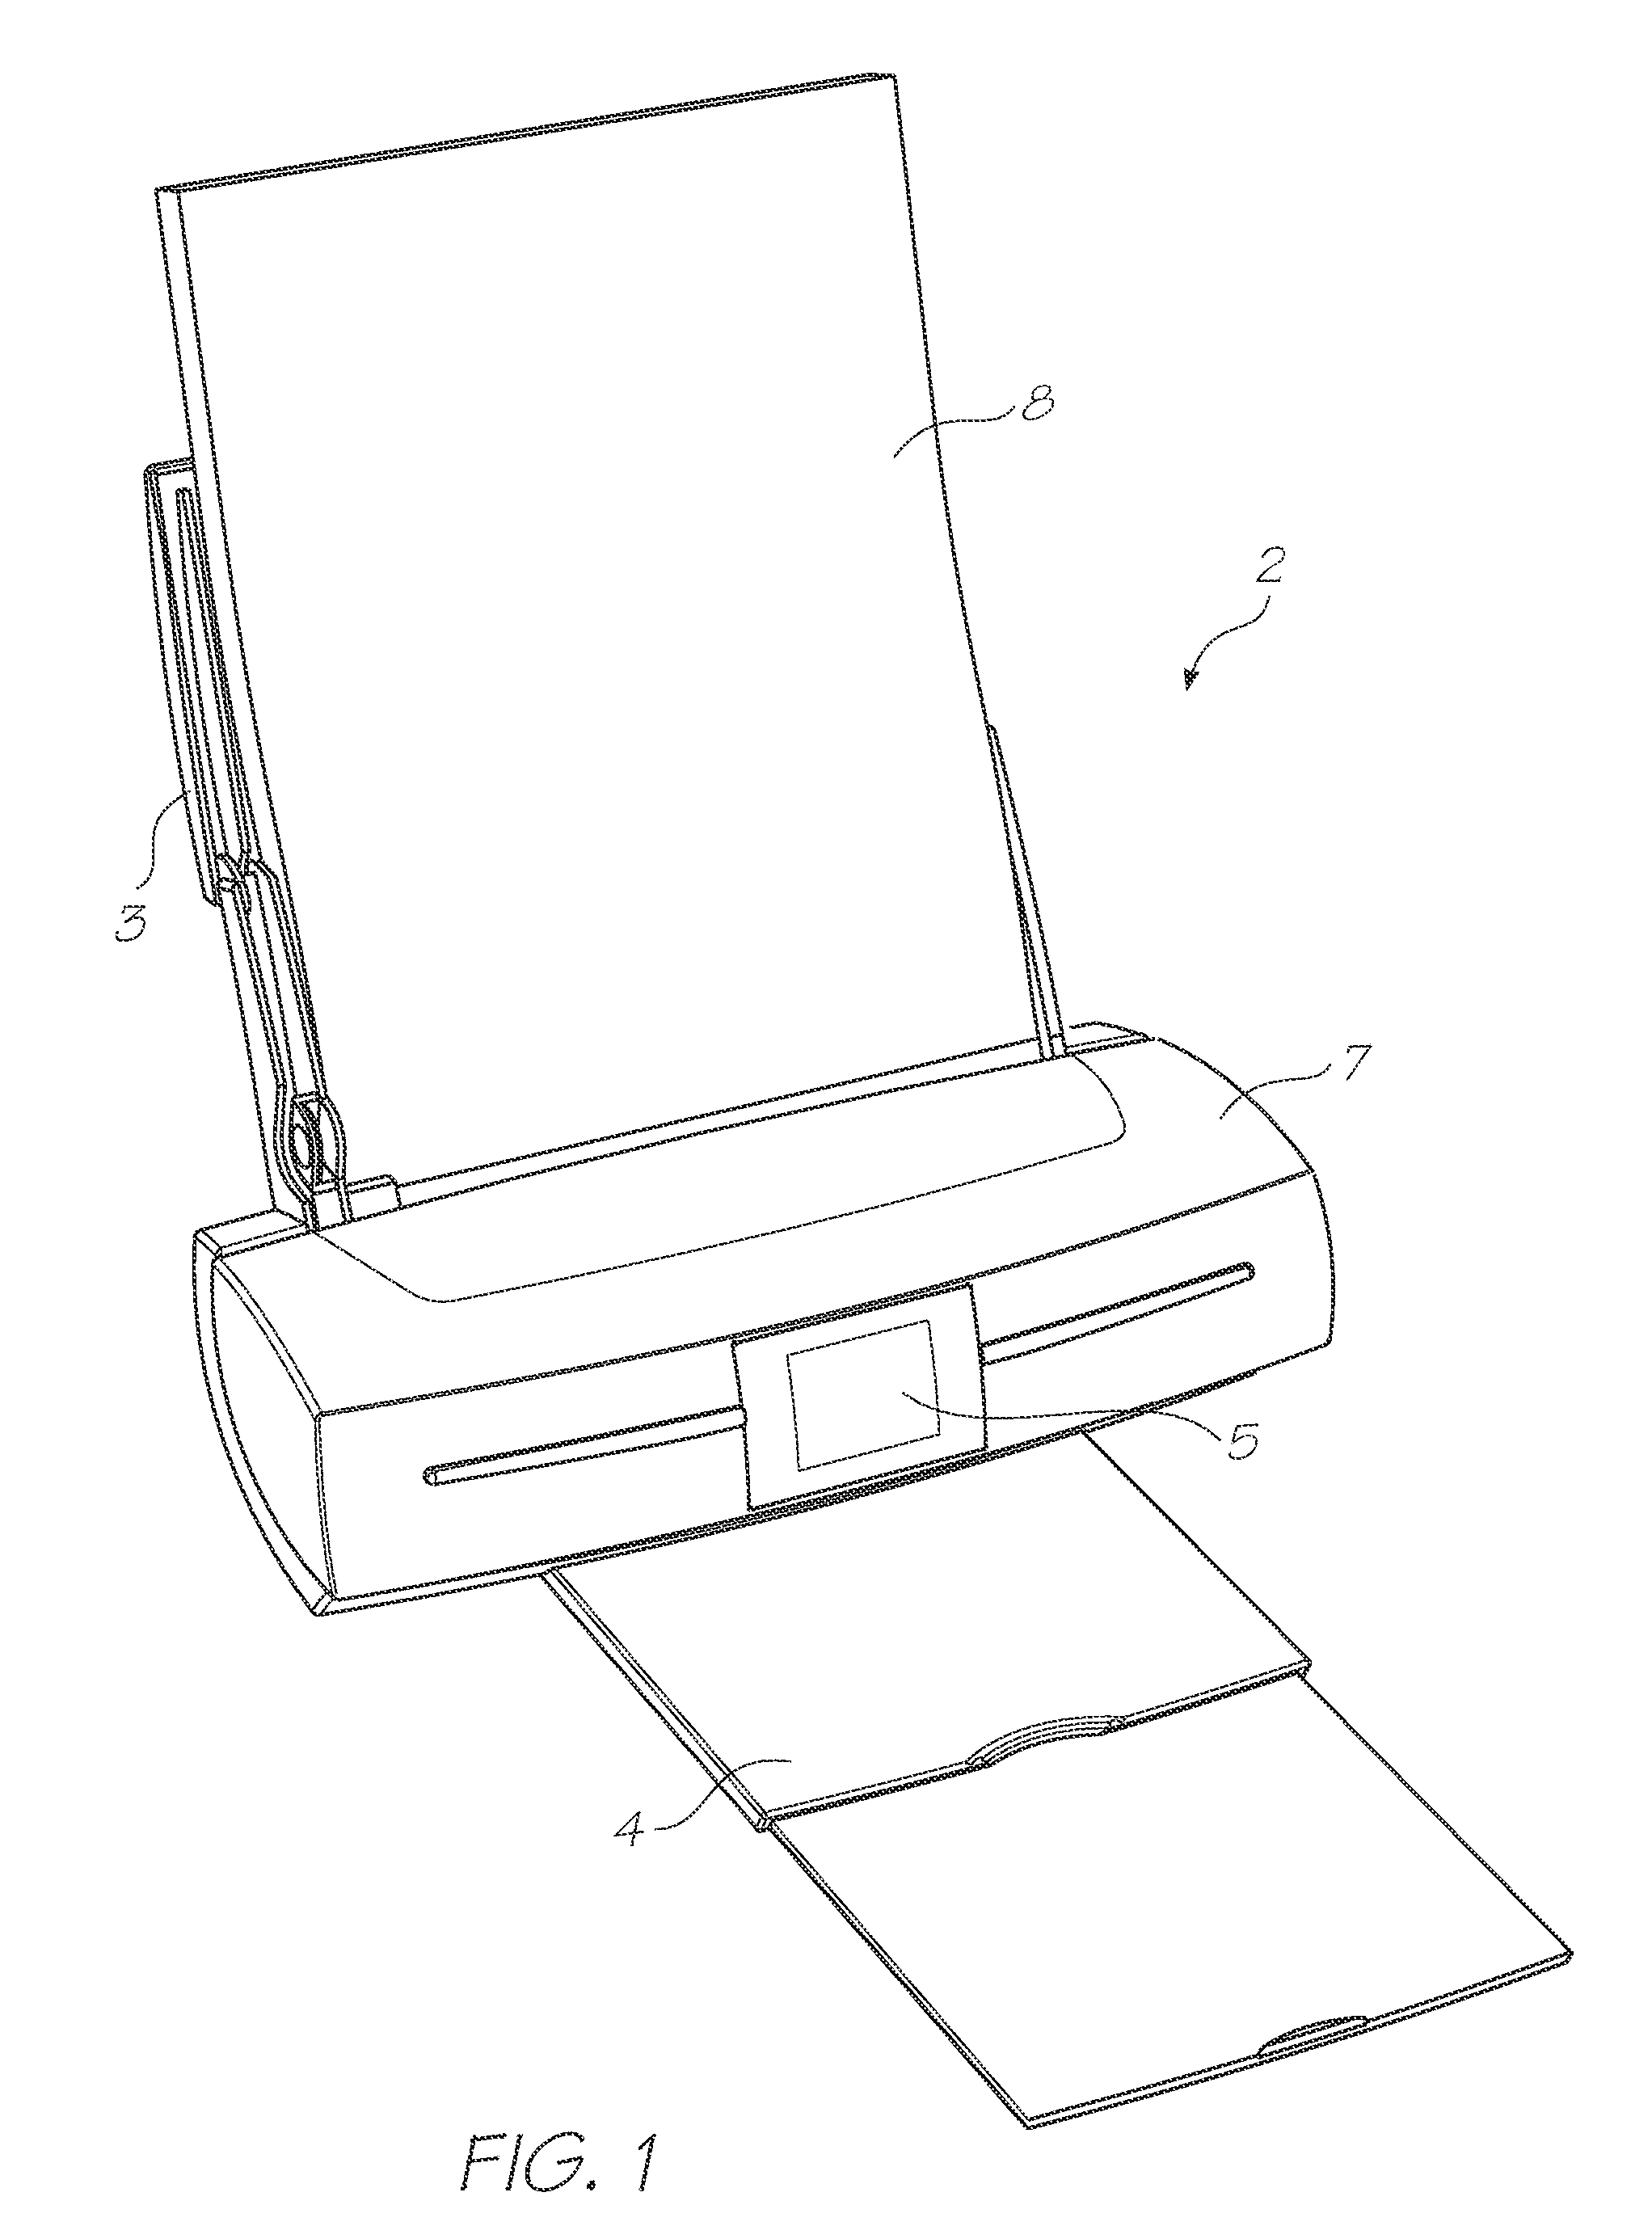 Printhead integrated circuit having longitudinal ink supply channels reinforced by transverse walls